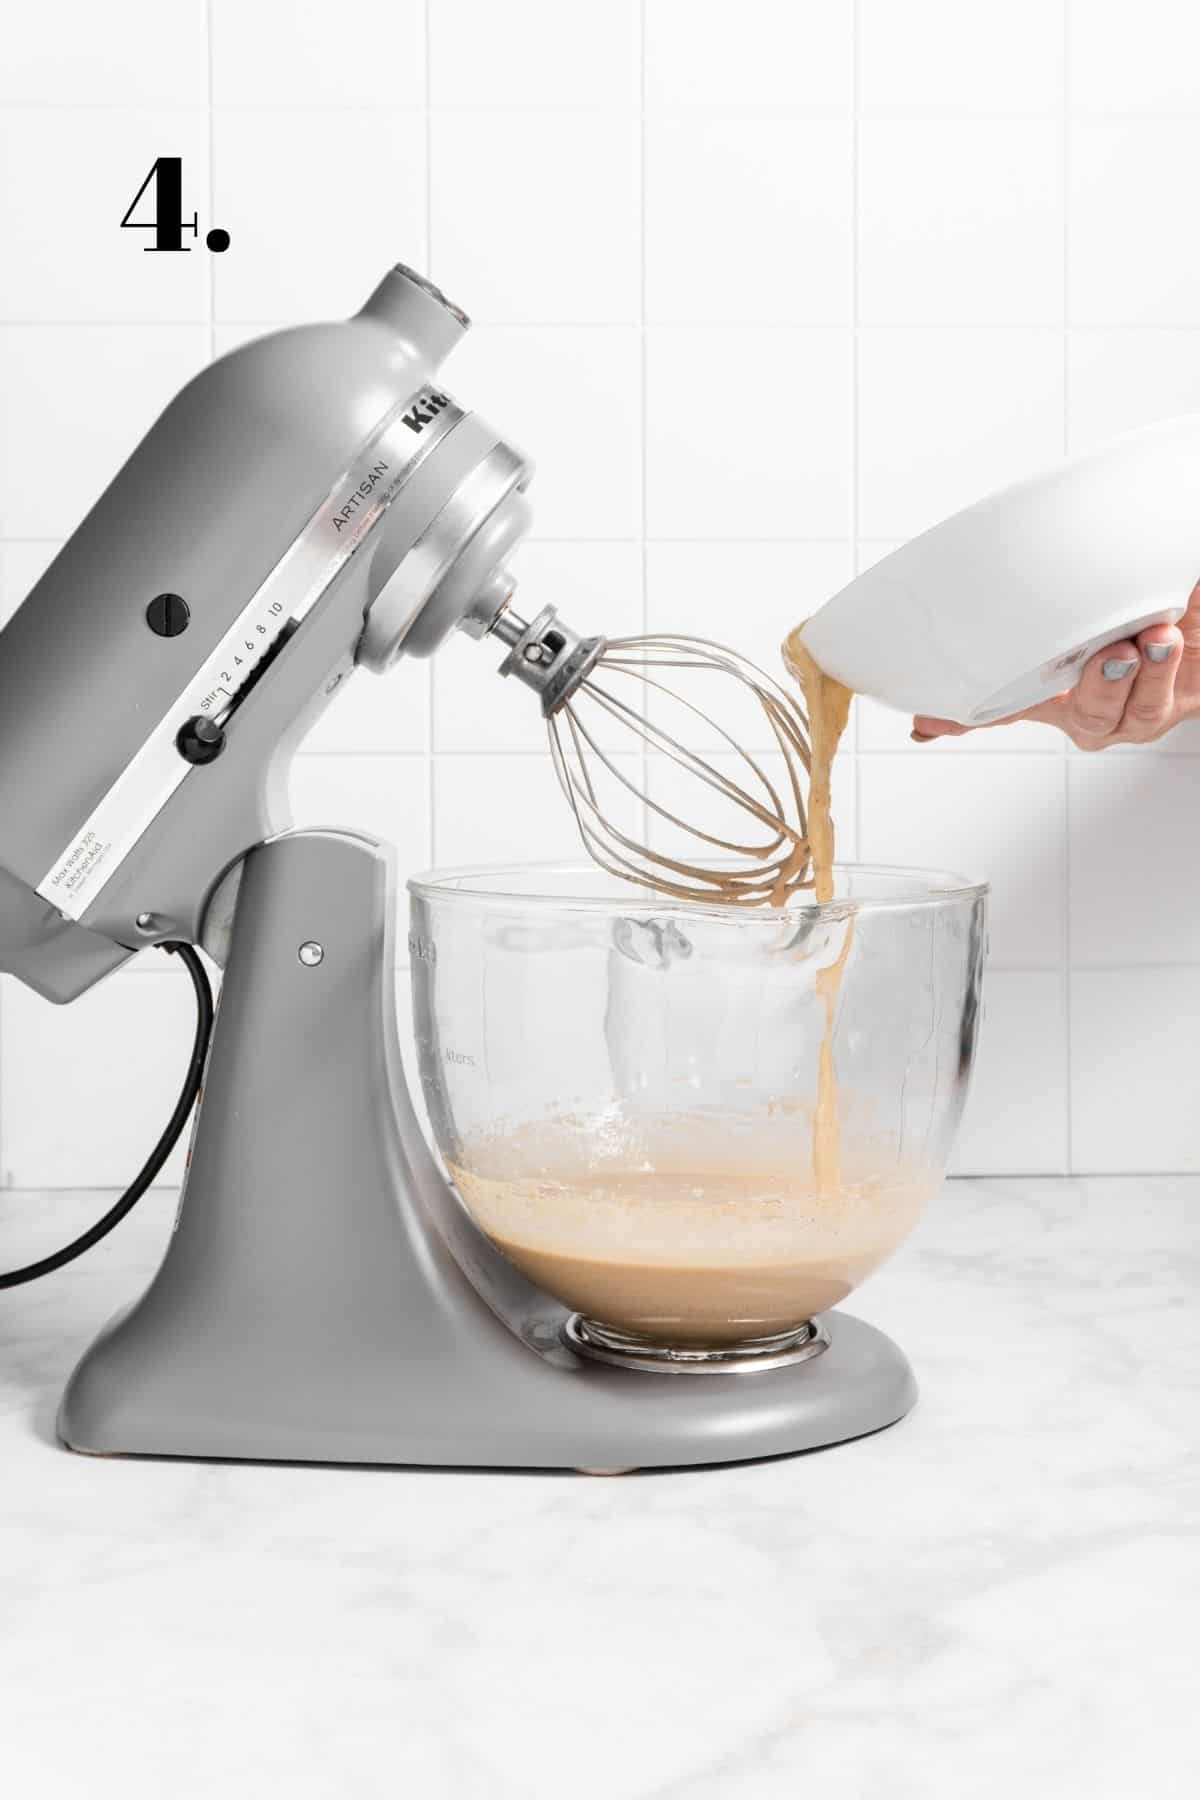 stand mixer with a glass bowl holding cake batter and mashed banana being poured in.